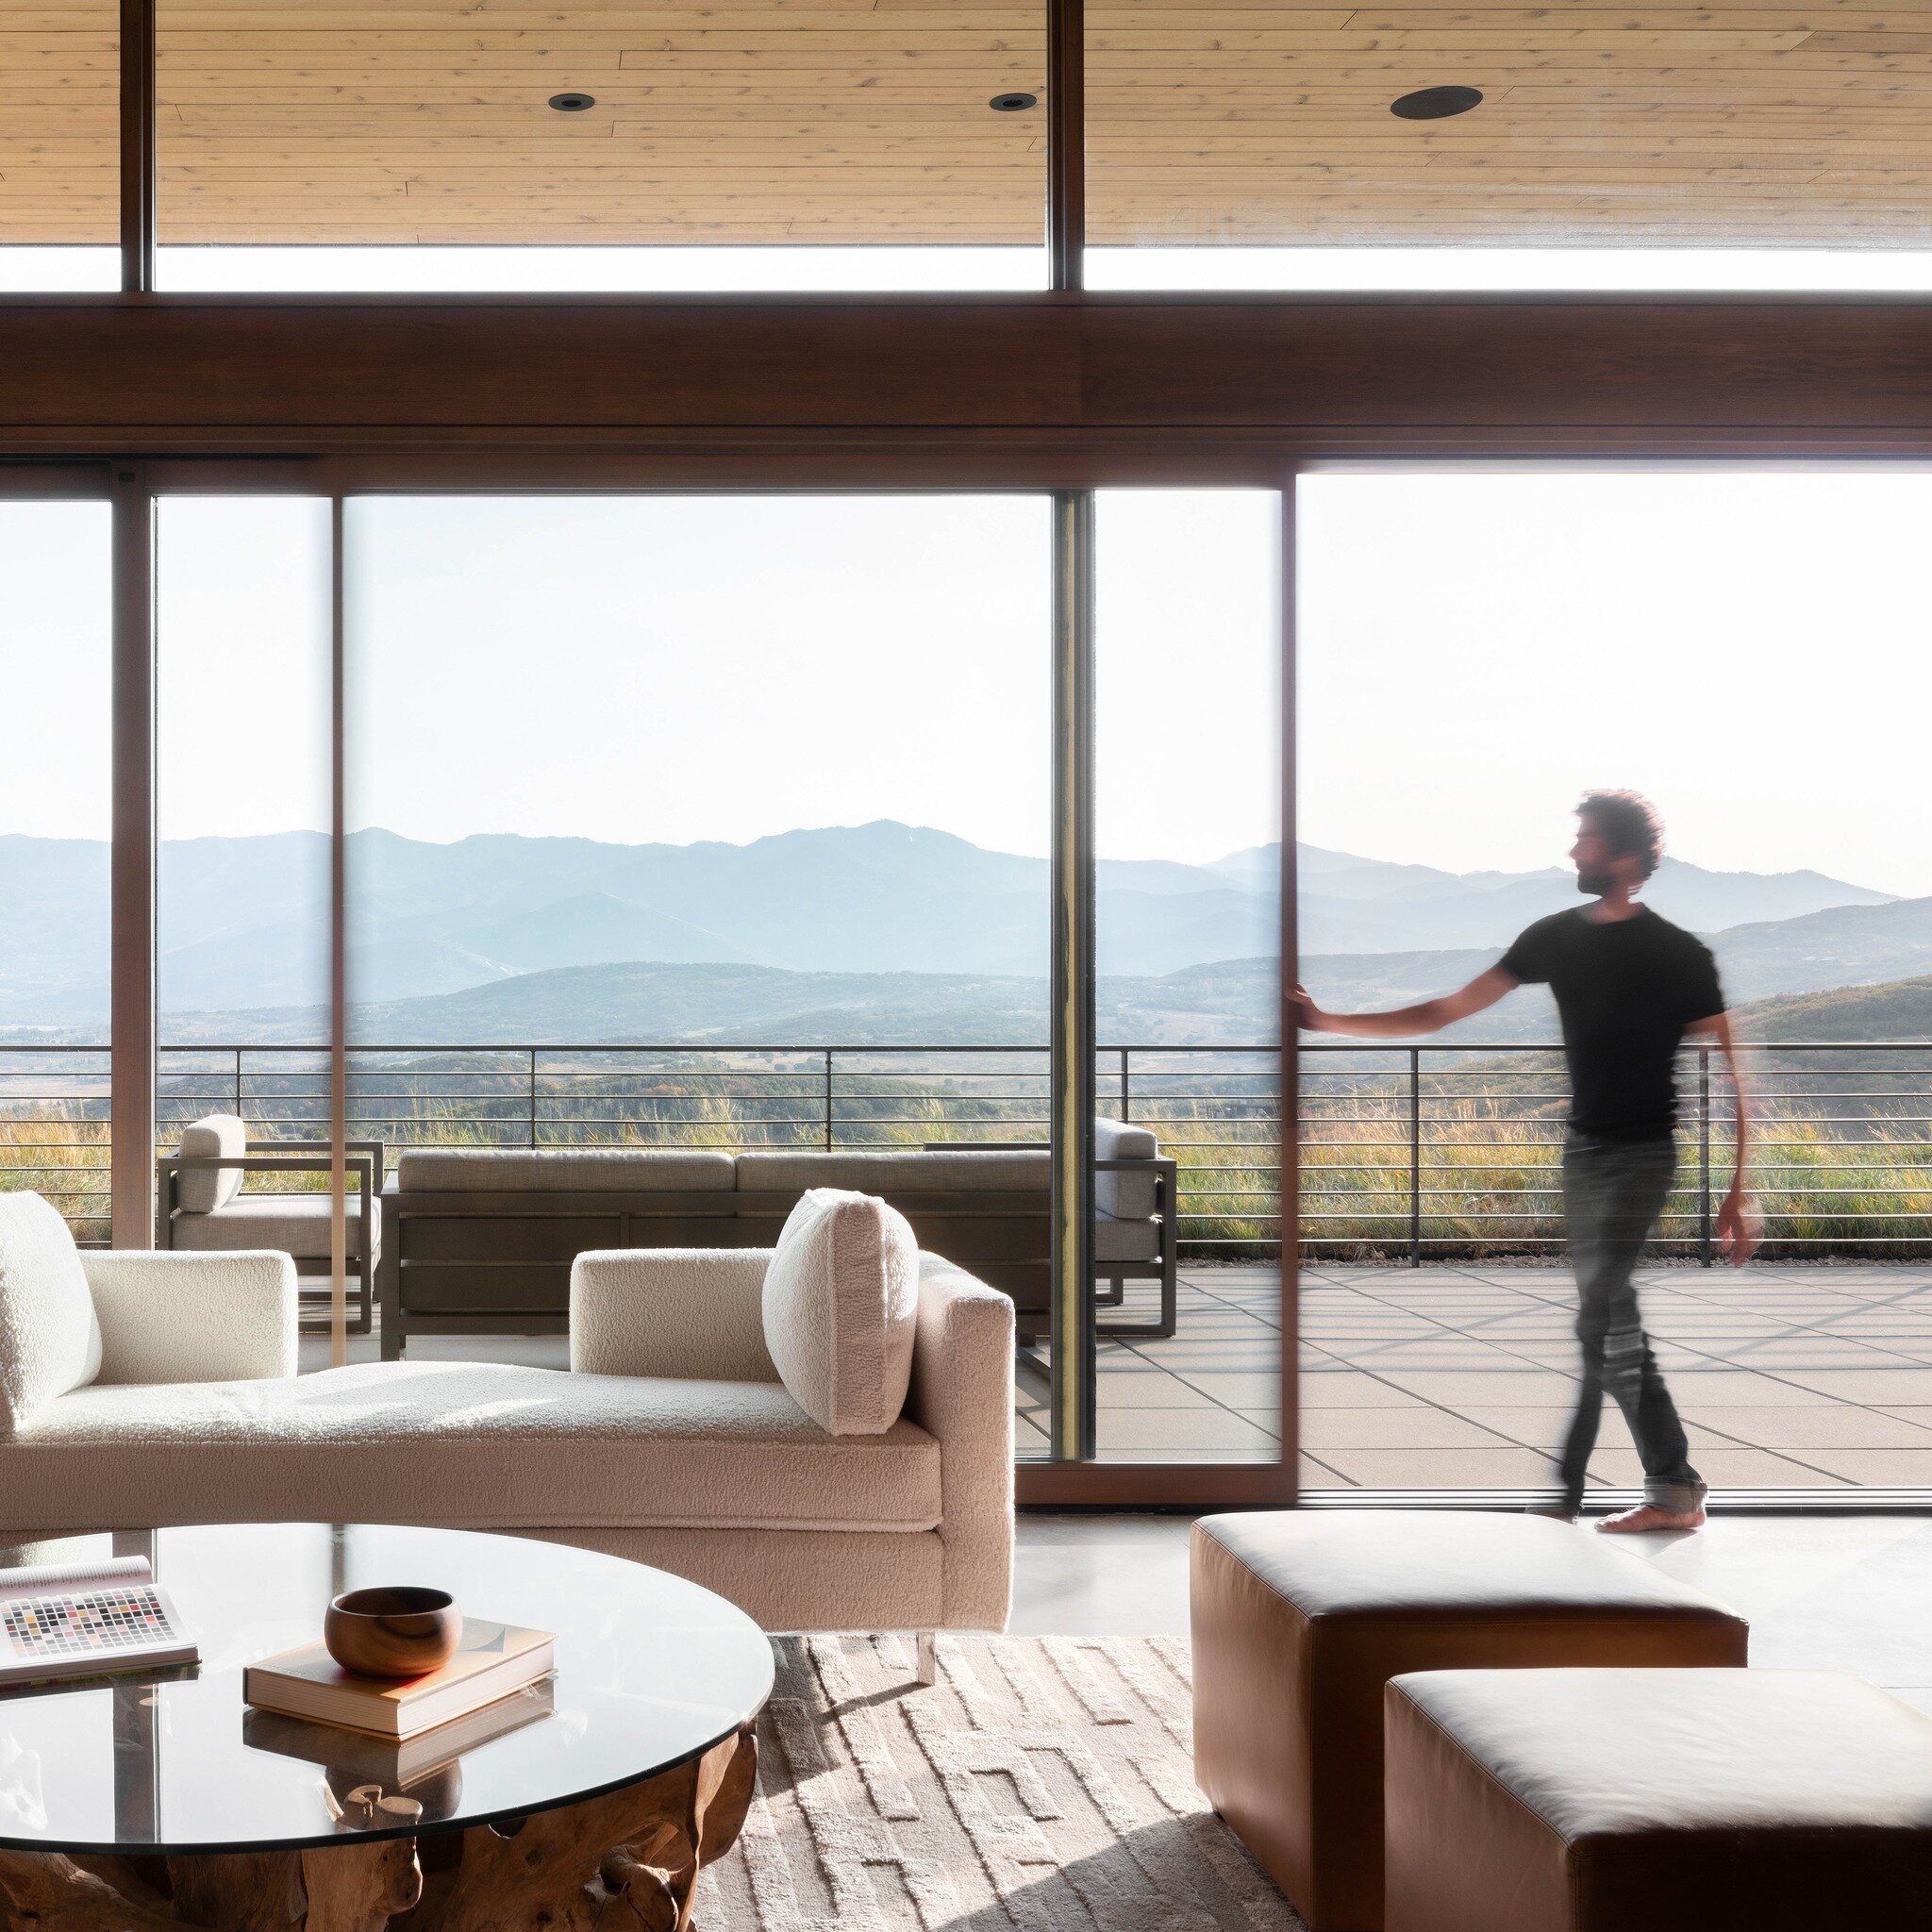 here's hoping the weather holds out for some roof deck action this weekend #modern #parkcity #home